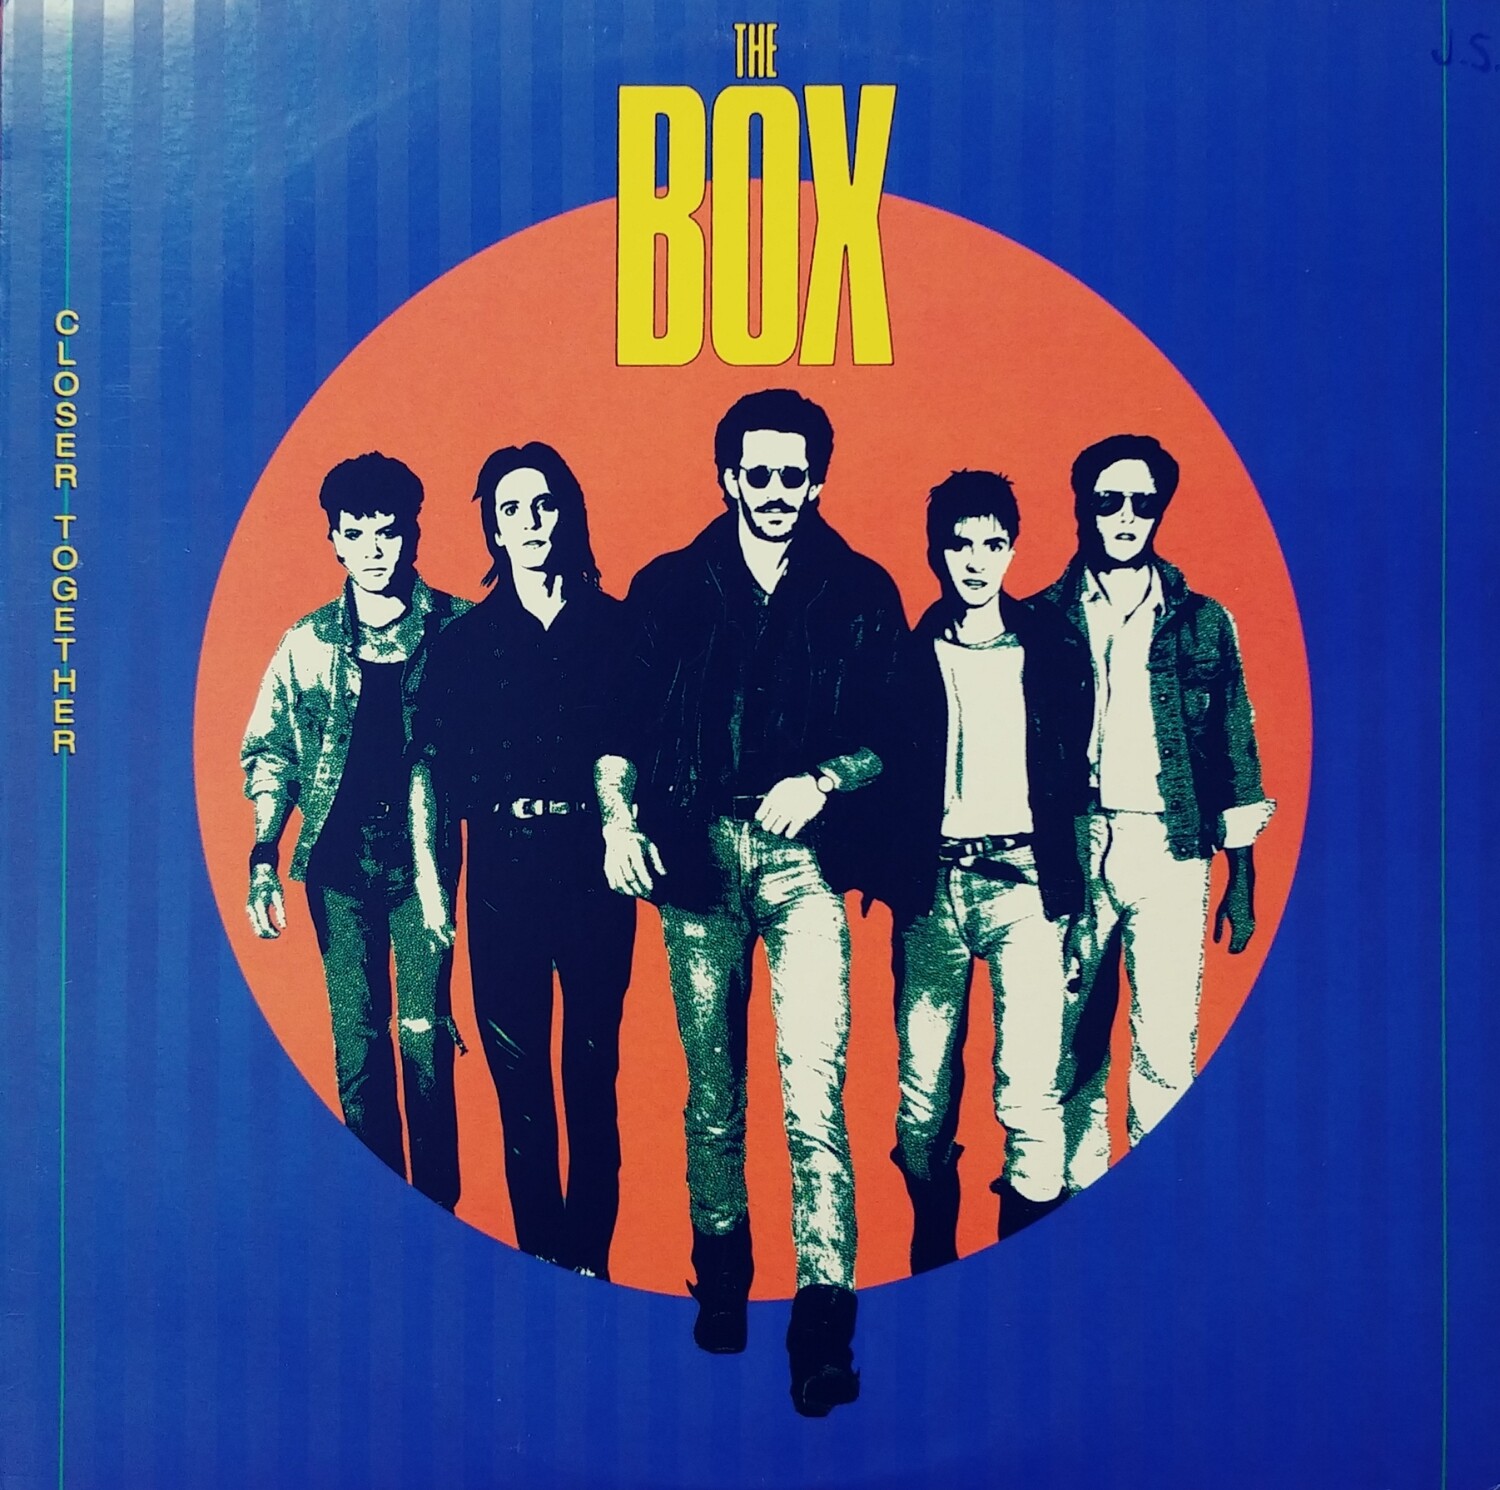 The Box - Closer together